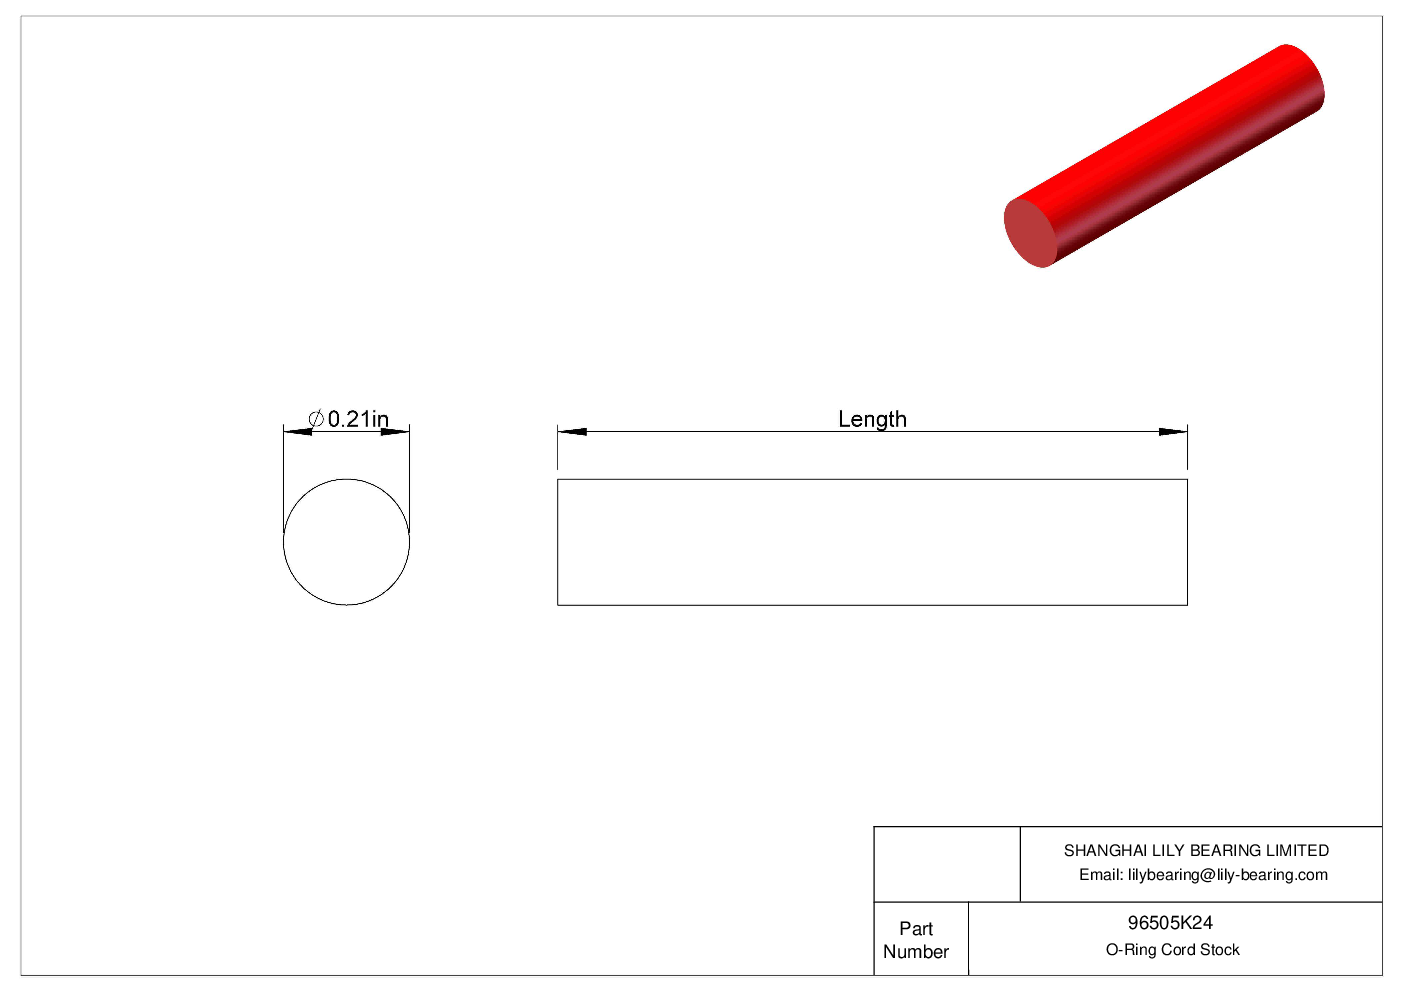 JGFAFKCE High Temperature O-Ring Cord Stock Round cad drawing